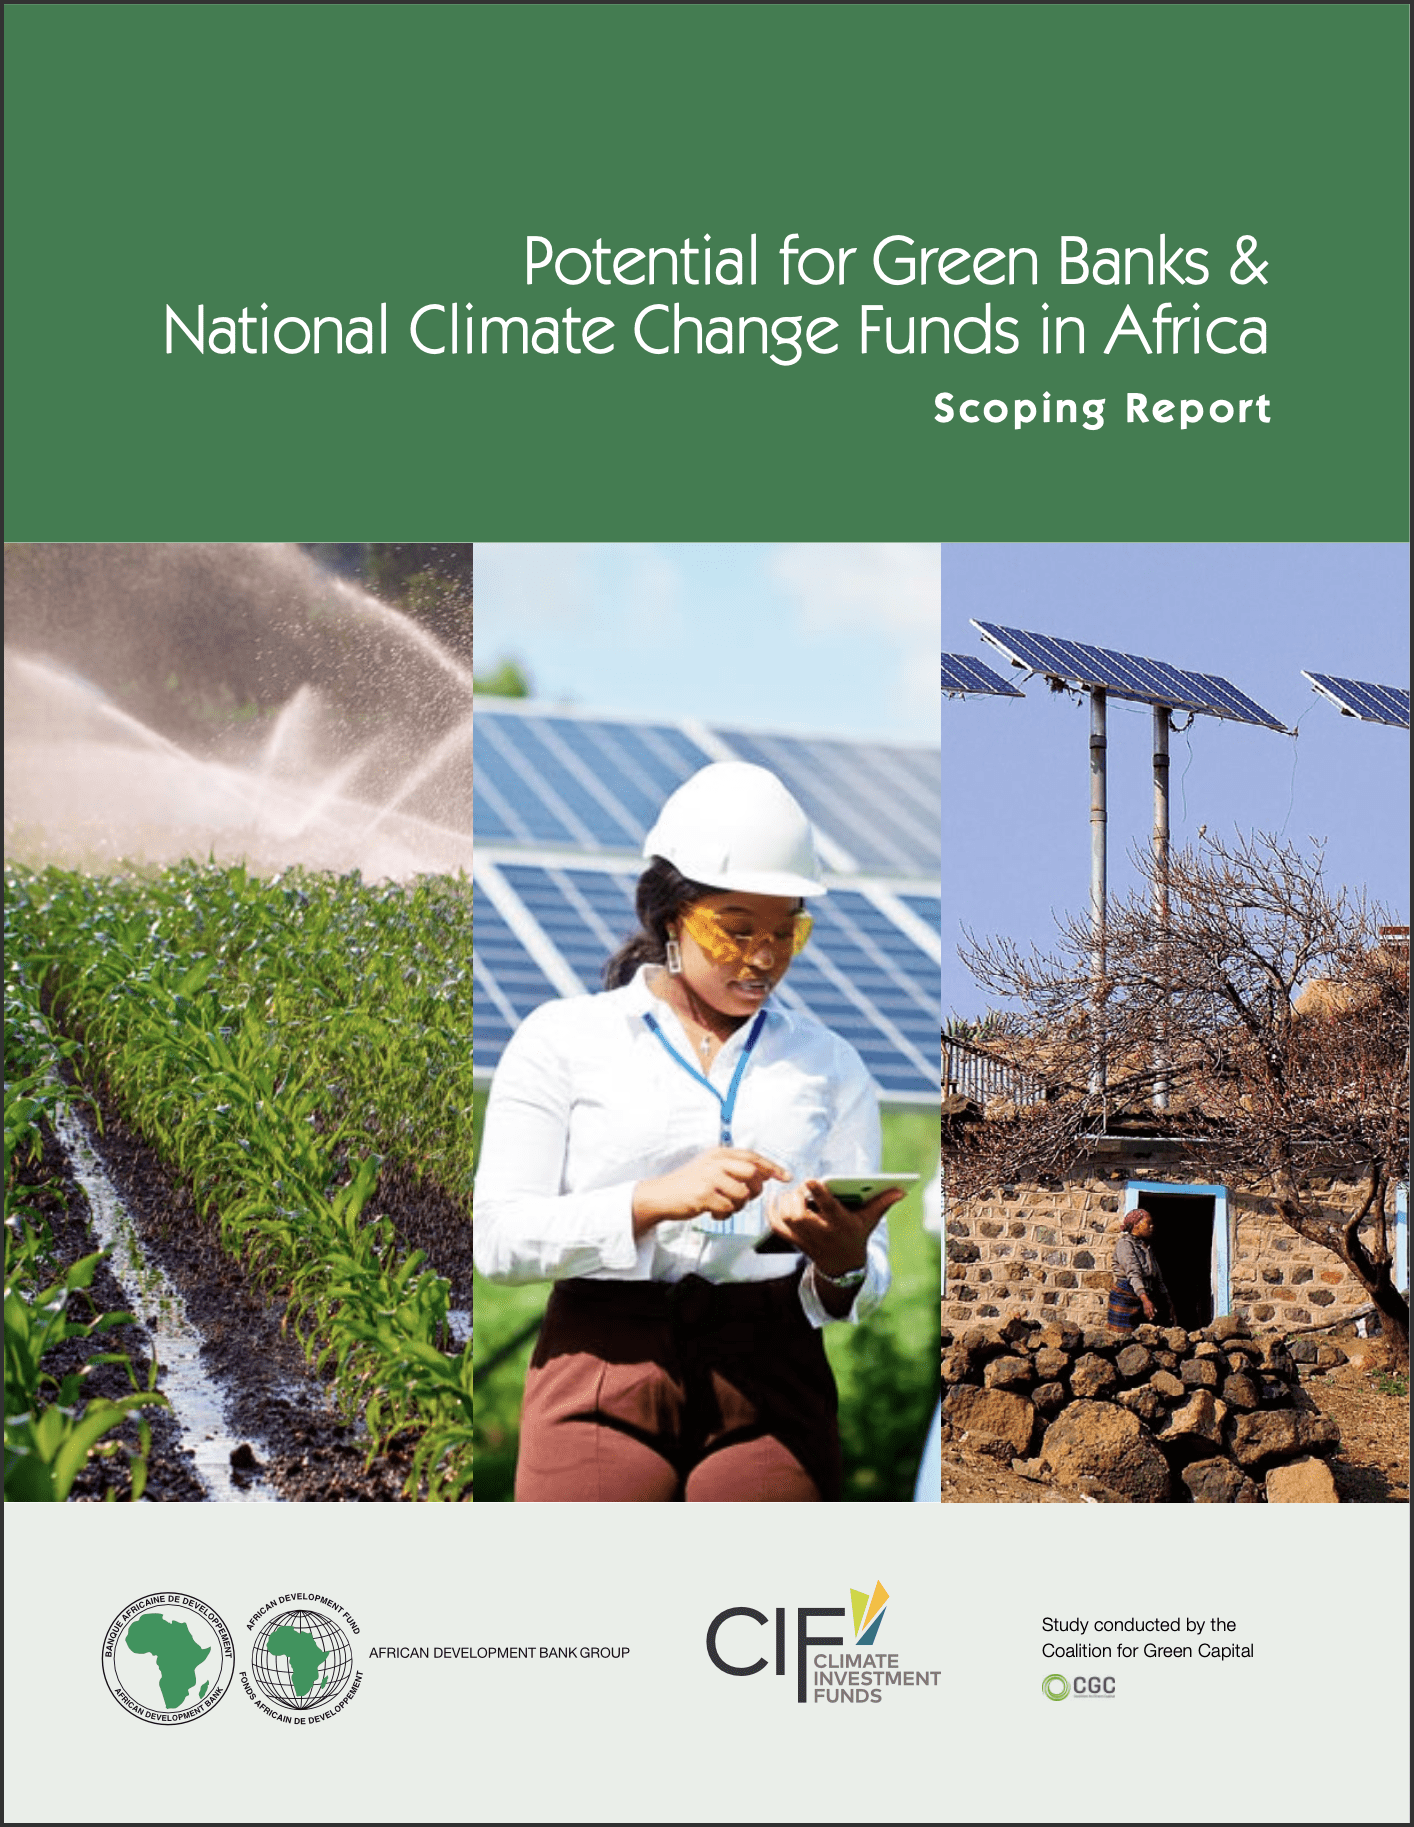 Scoping Report: Potential for Green Banks & National Climate Change Funds in Africa (AfDB & CIF, 2021)